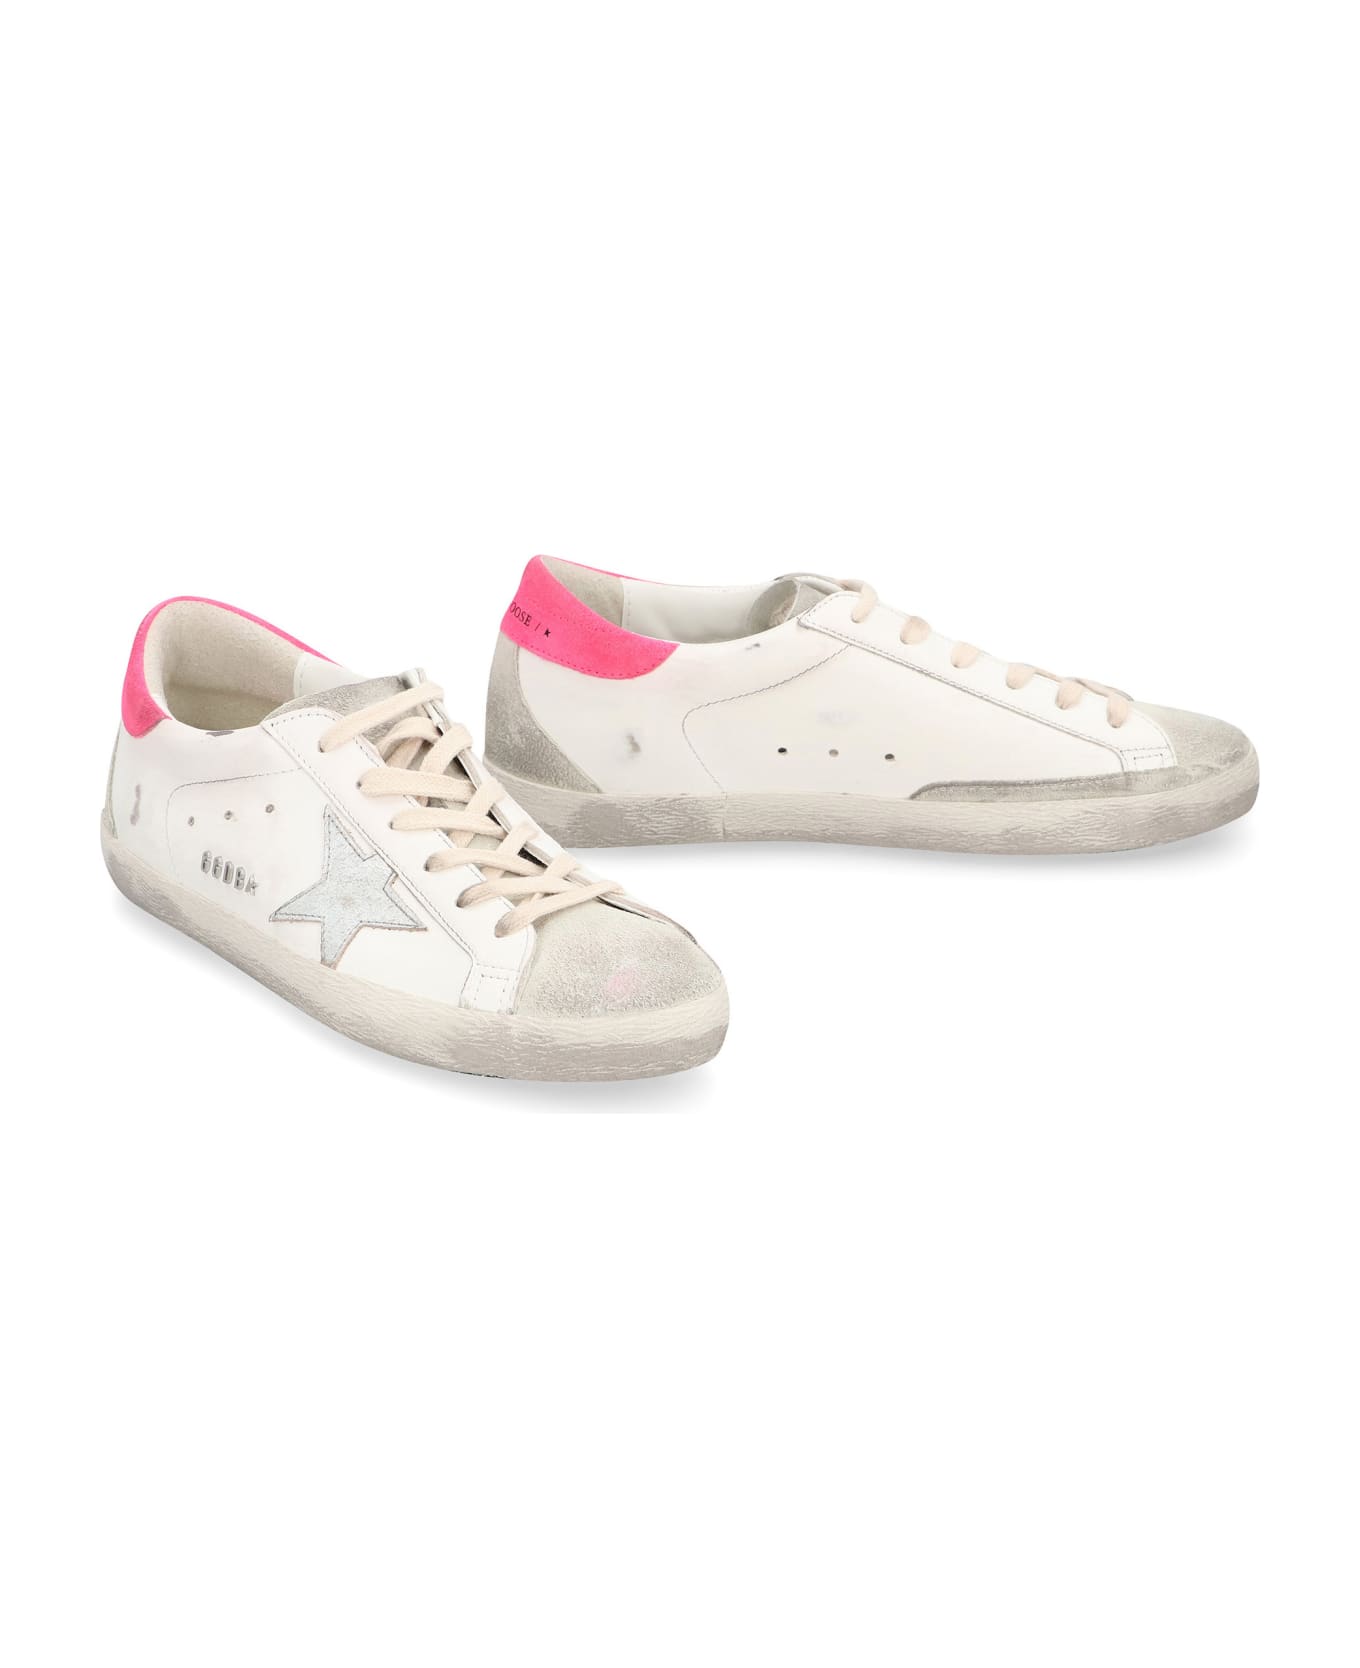 Golden Goose Super-star Leather Low-top Sneakers - White/ice/silver/lobster fluo